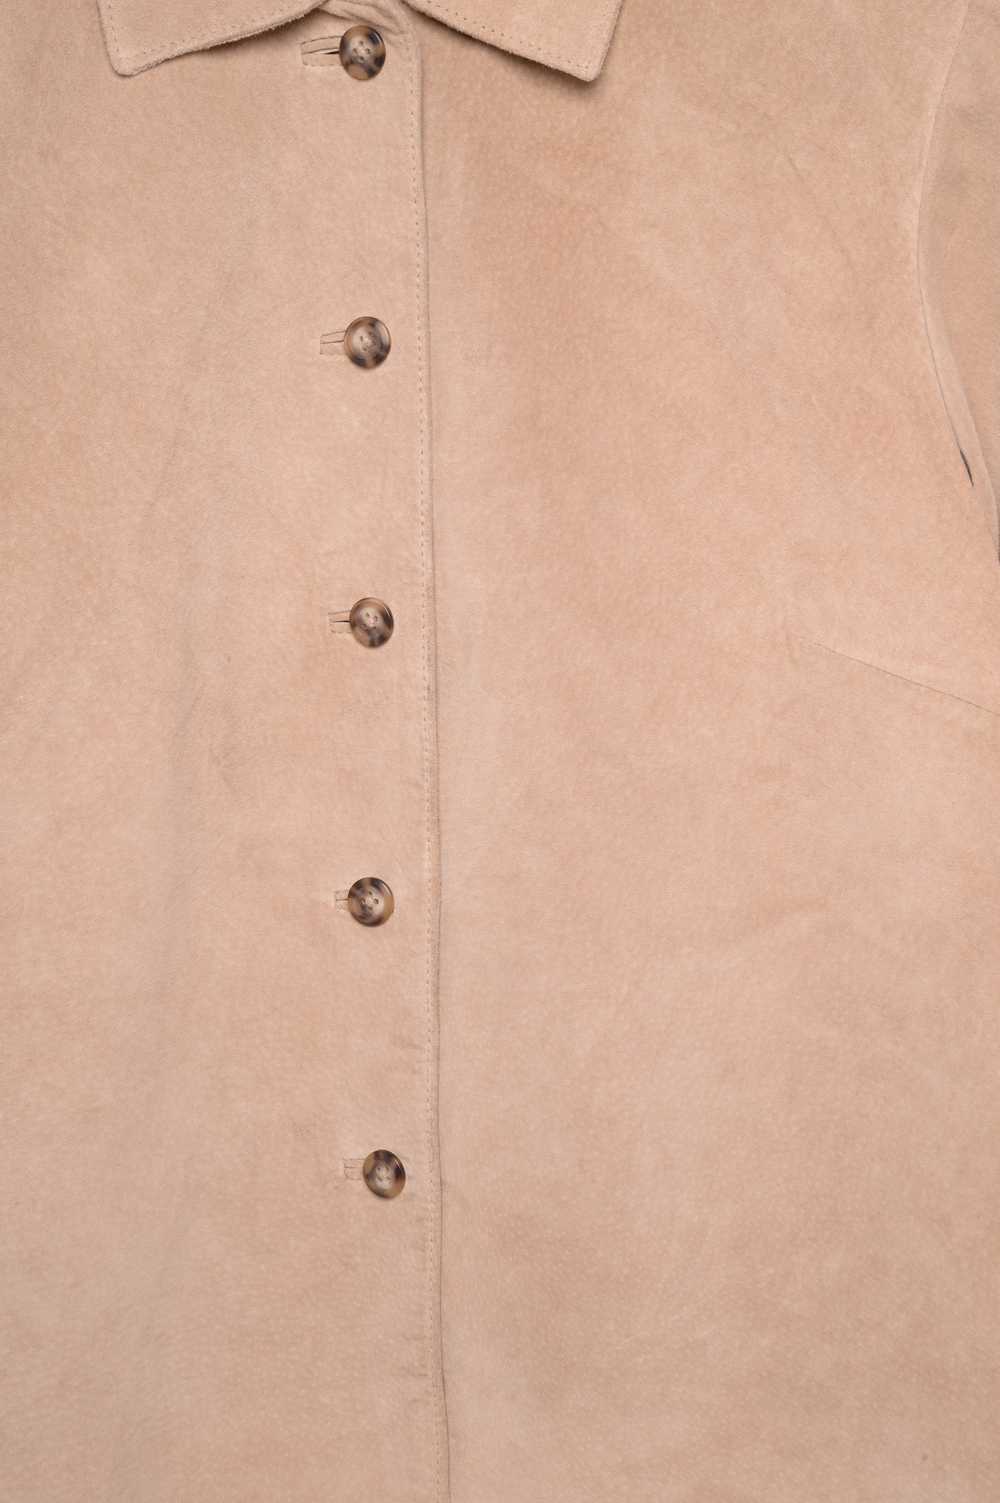 Suede Button Down Top - image 2